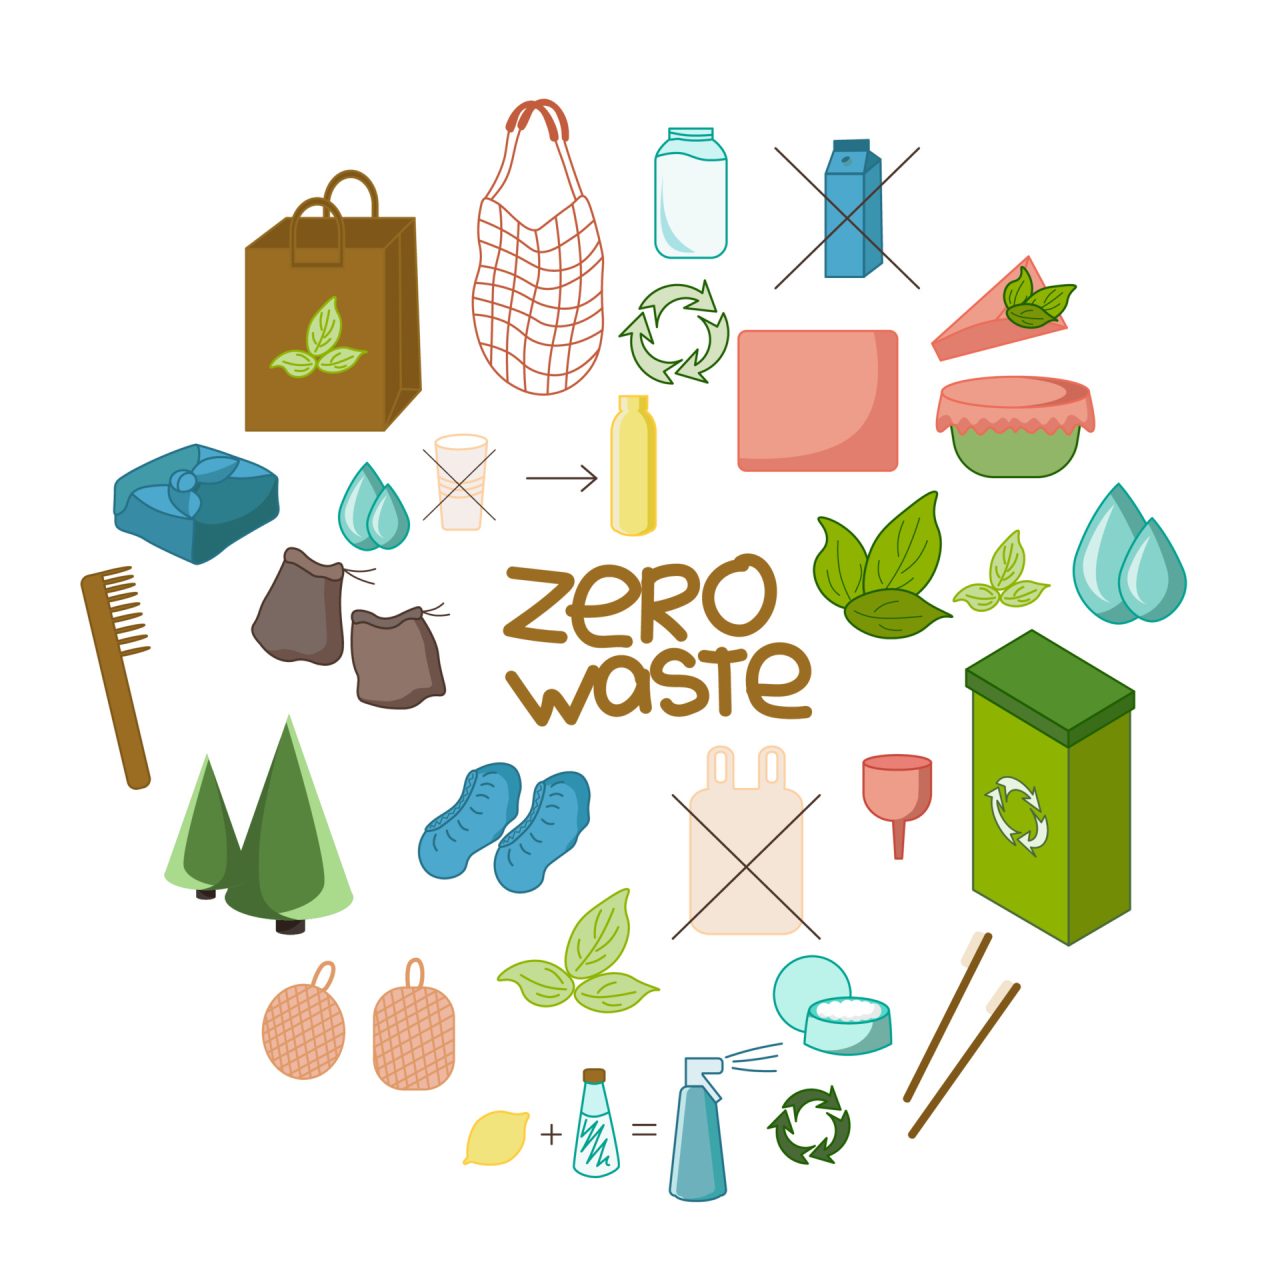 vecteezy_zero-waste-a-set-of-colored-icons-in-the-shape-of-a_5722826-1280x1280.jpg